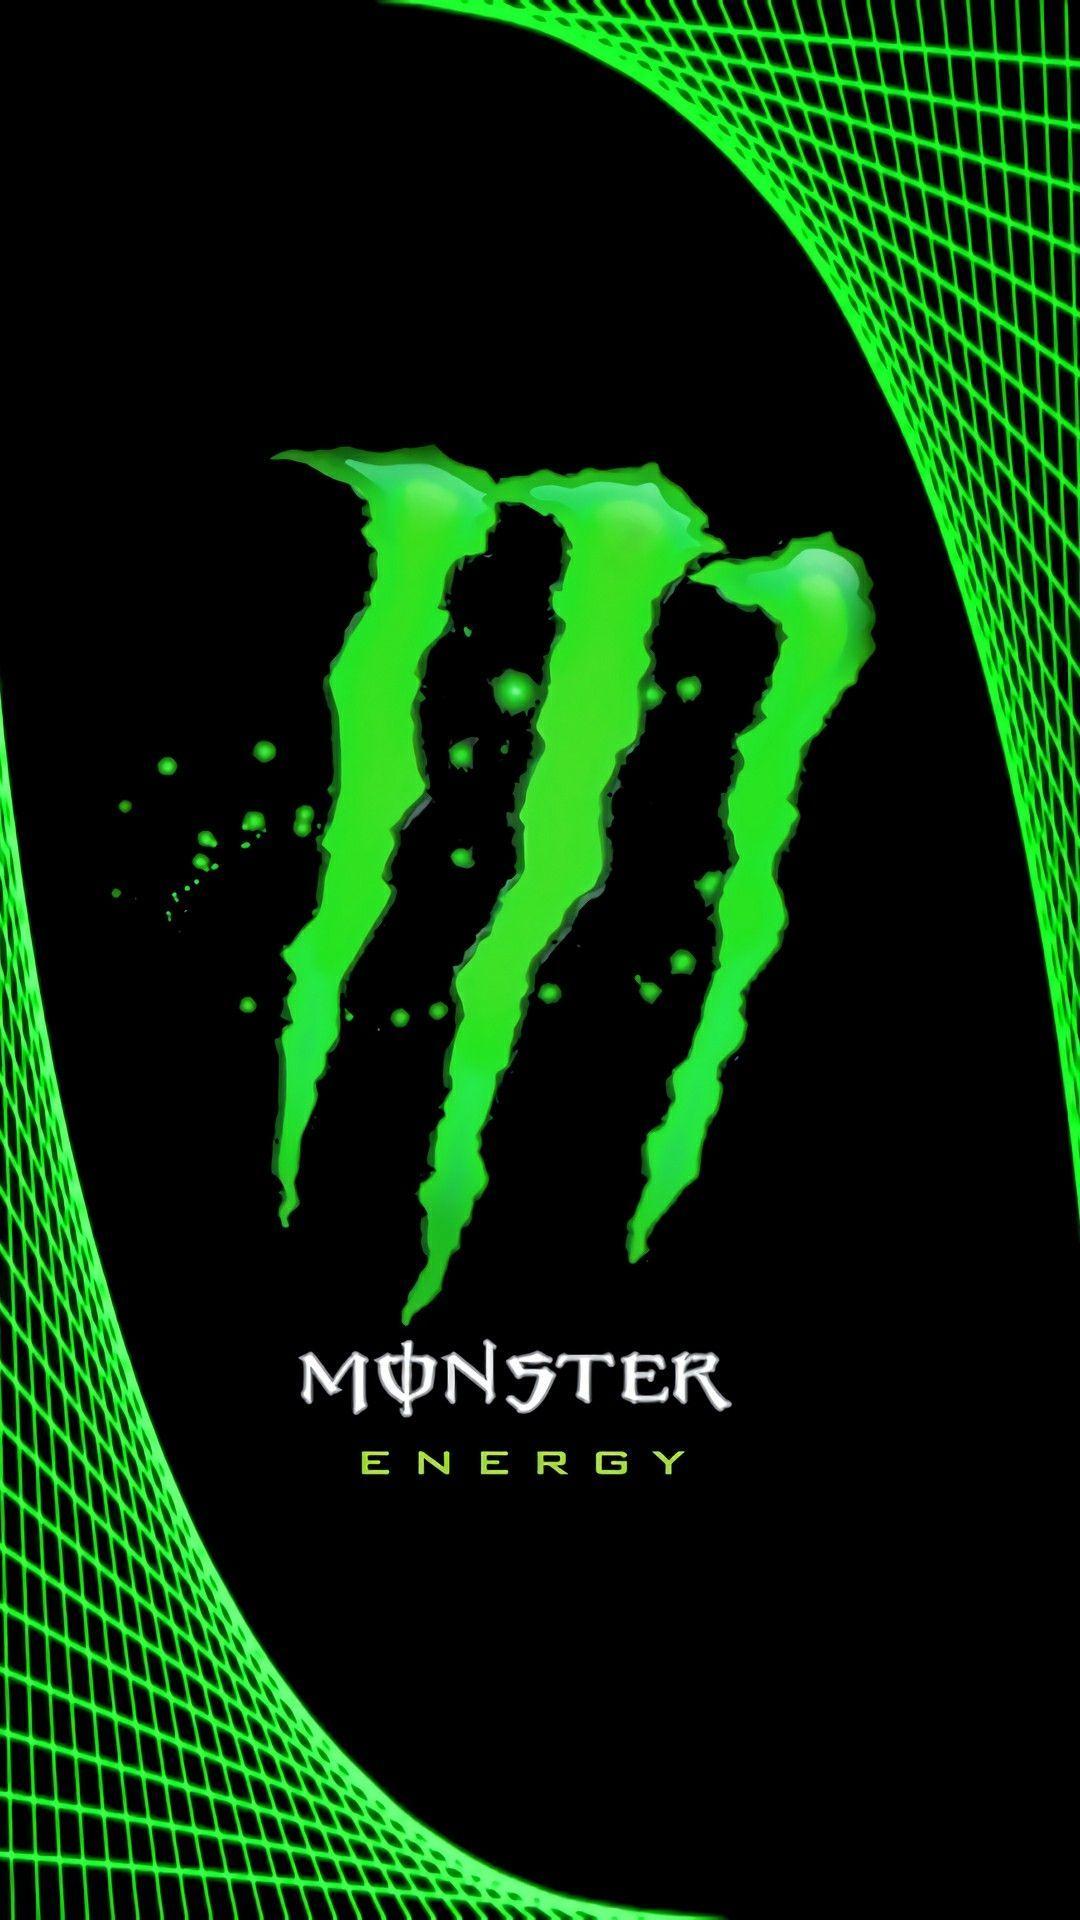 Fox Racing with Monsters Logo - Pin by Jamie Jones on Monster Energy/Fox Racing in 2019 | Monster ...